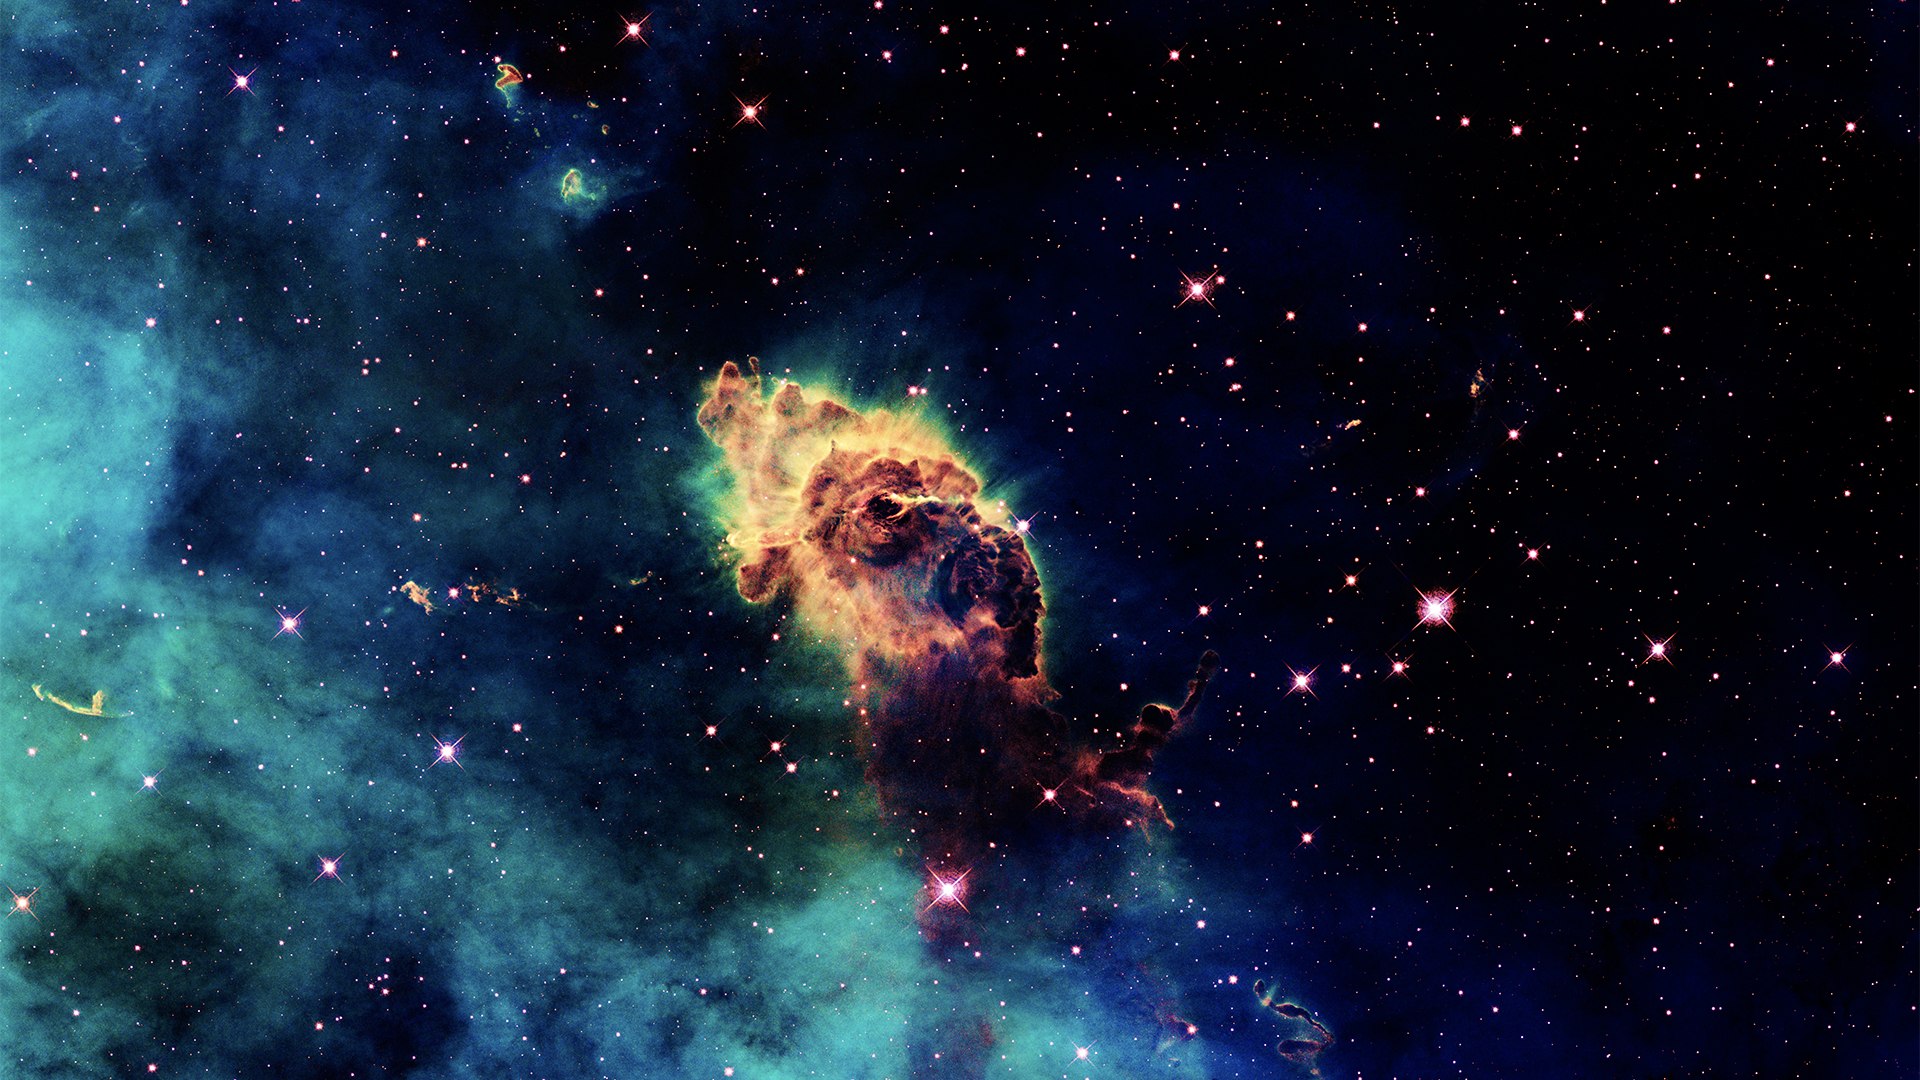 50 Hd Space Wallpapers Backgrounds For Free Download